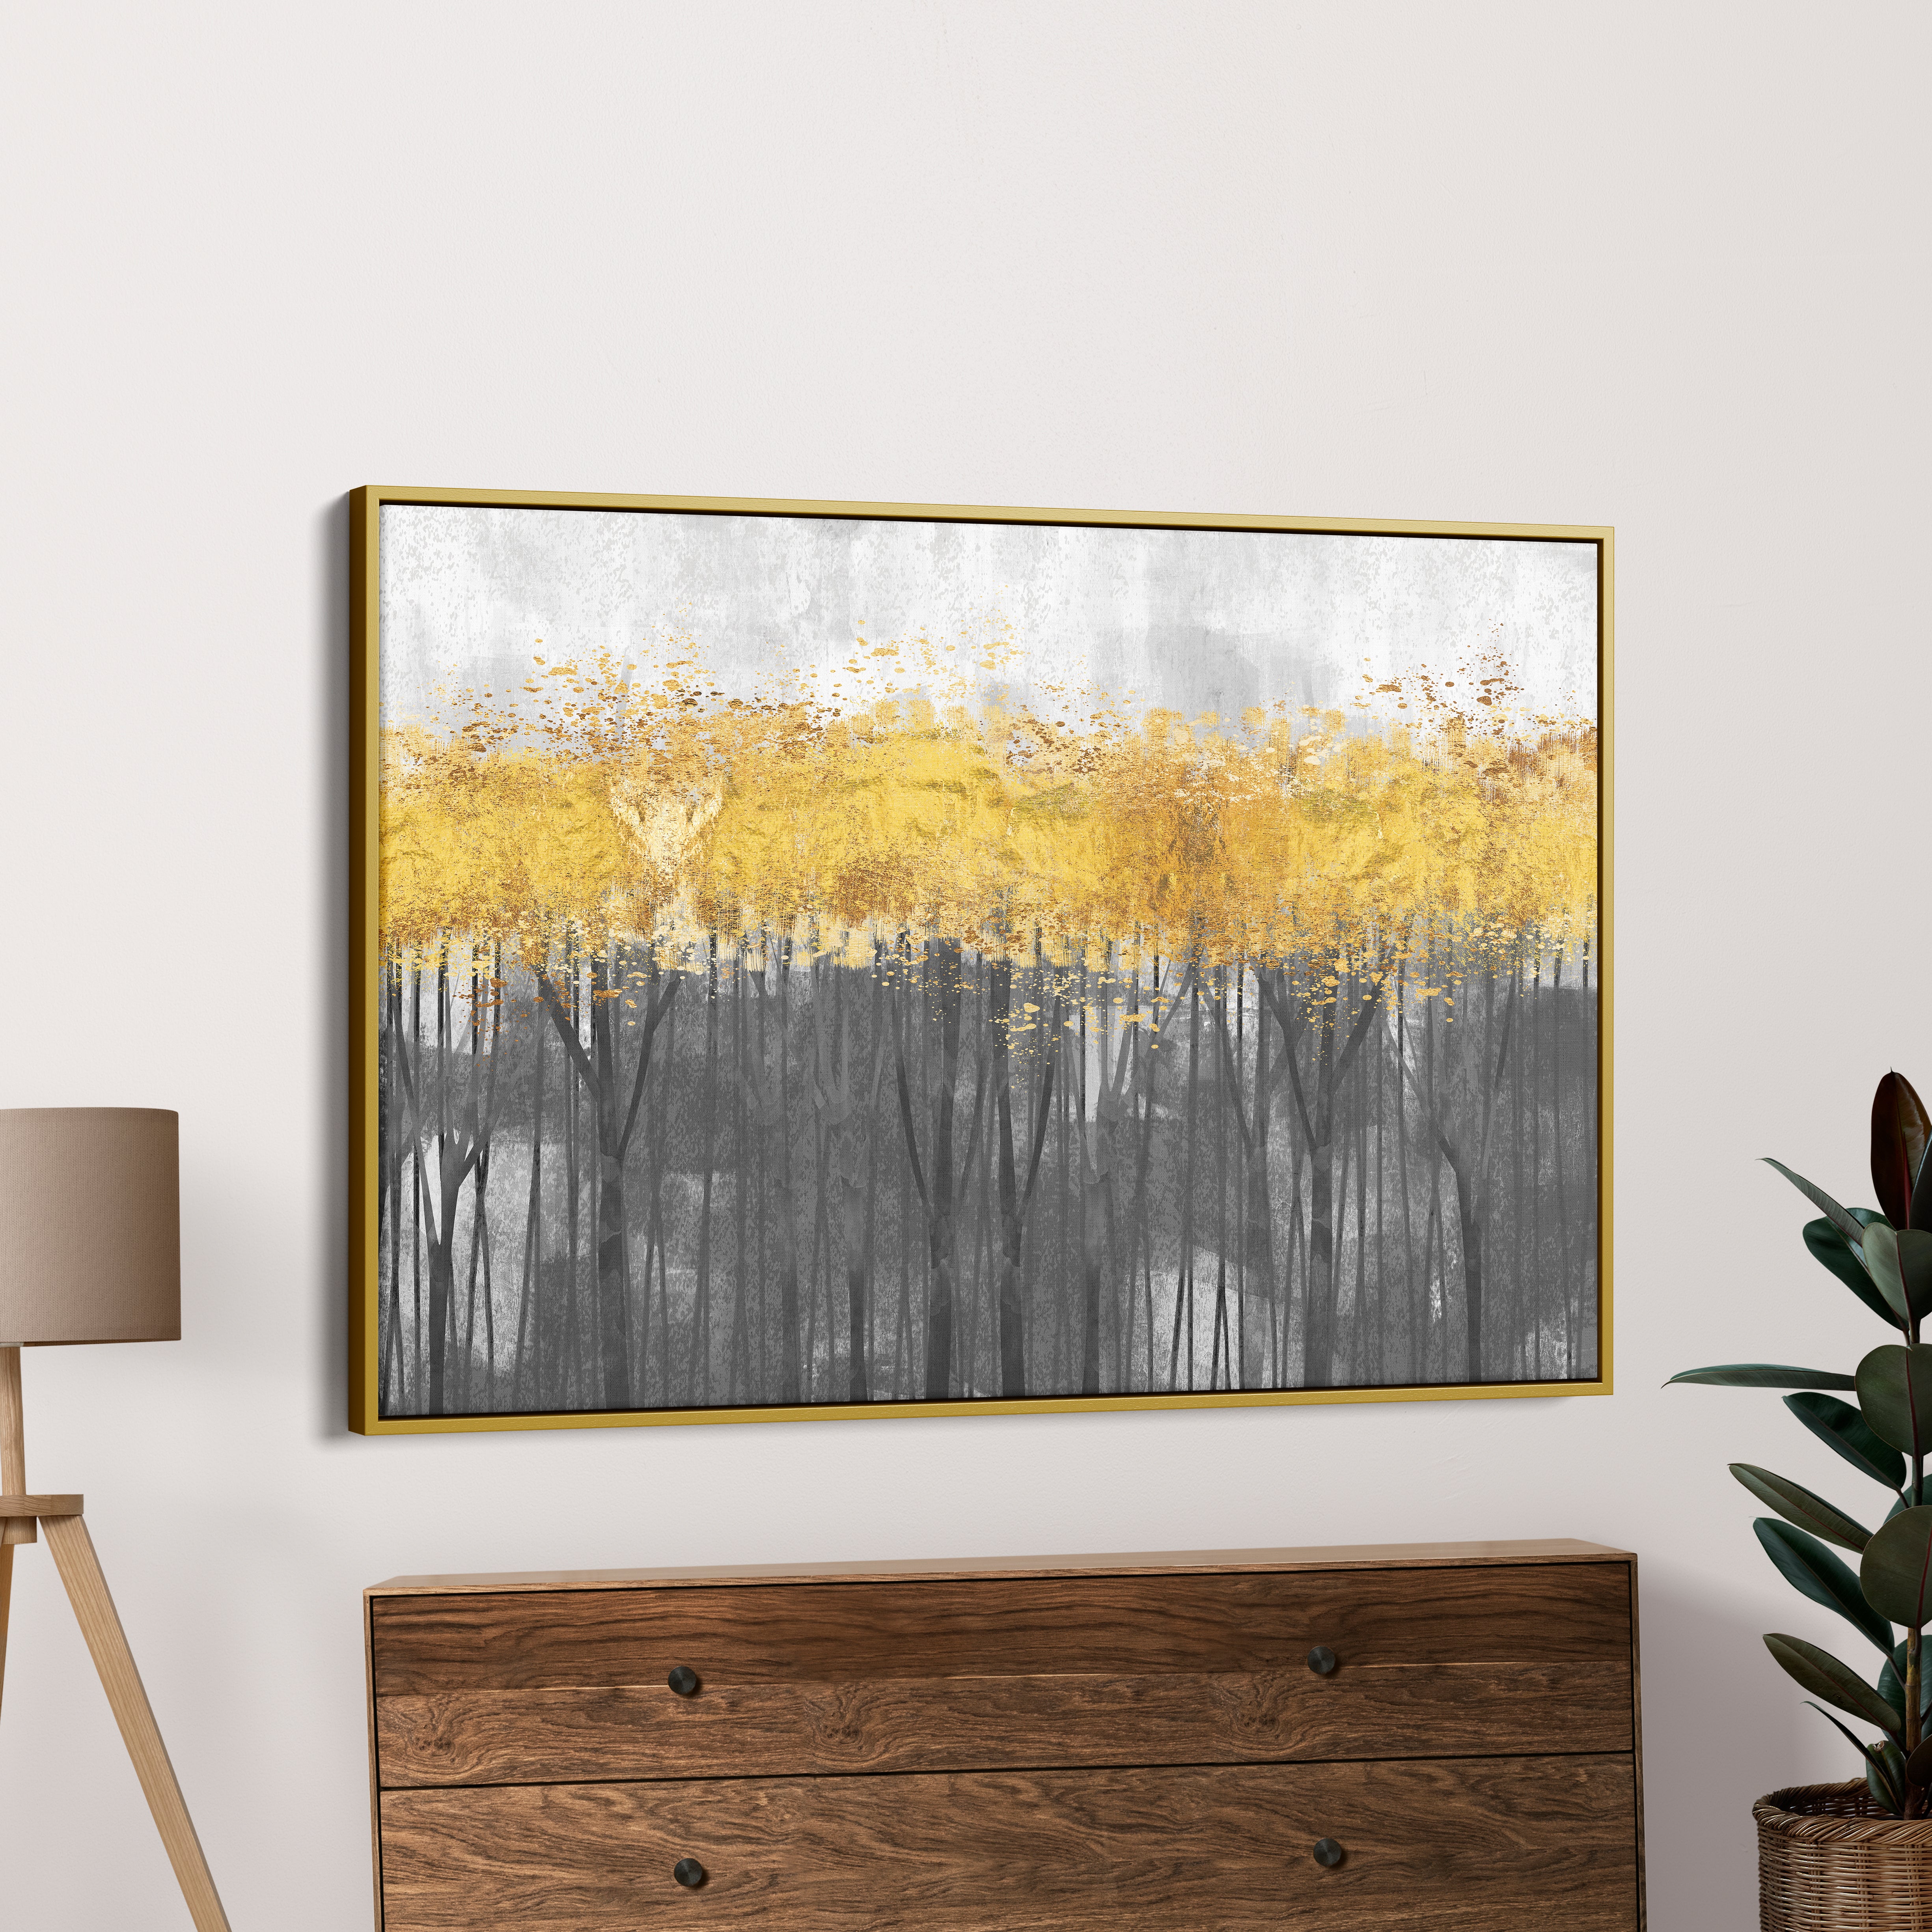 Abstract Golden And Black Mordern Art Canvas Wall Painting